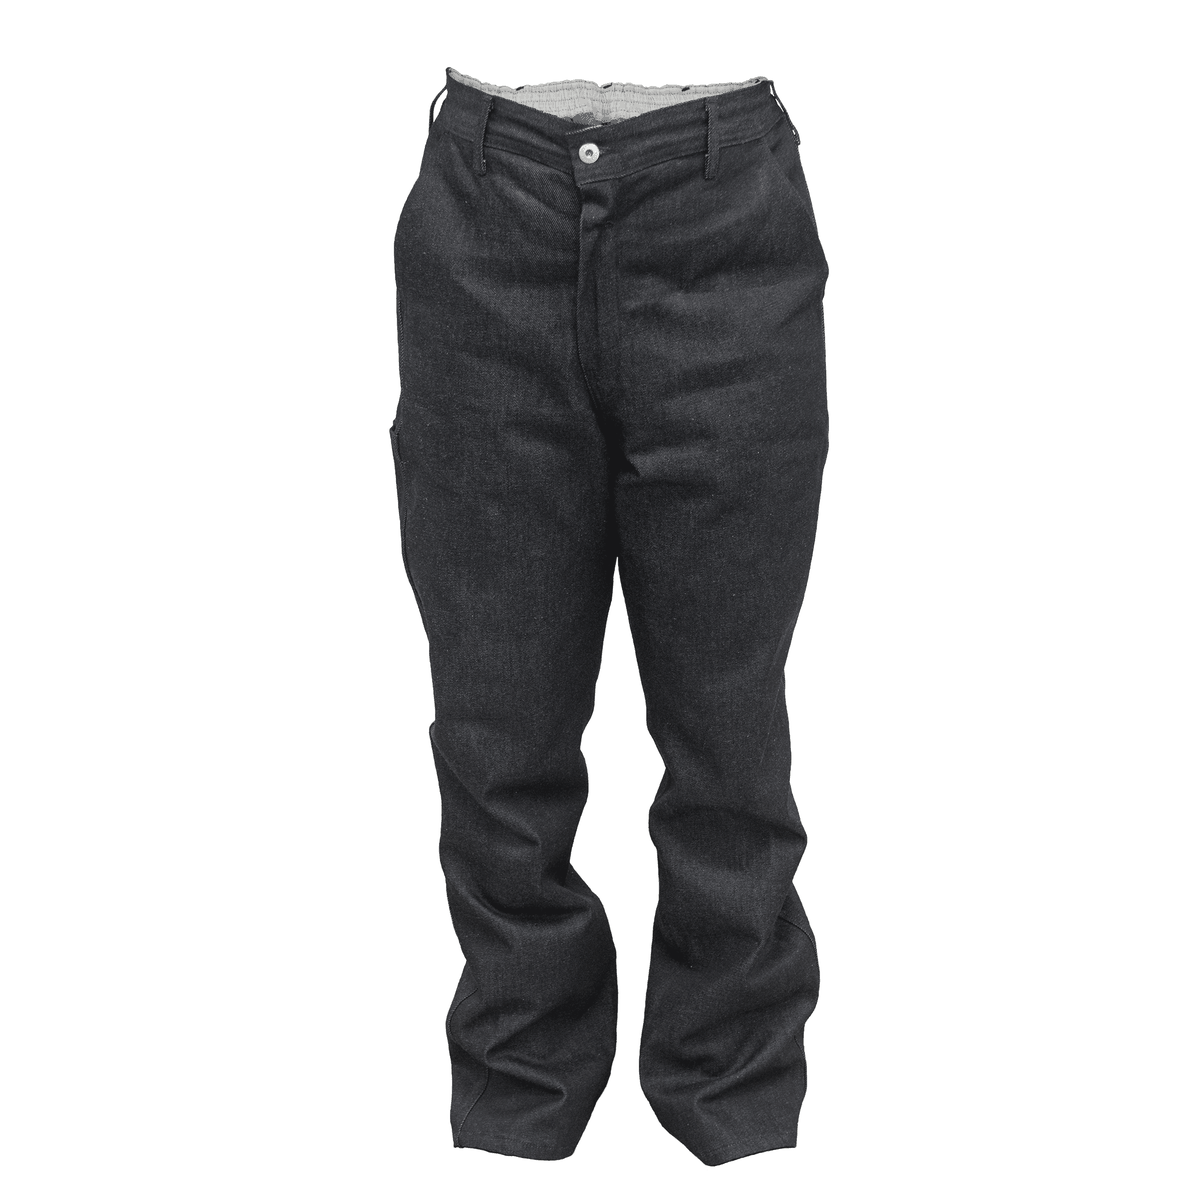 The Continental Denim Overall Trouser - Indigo | Shop Today. Get it ...